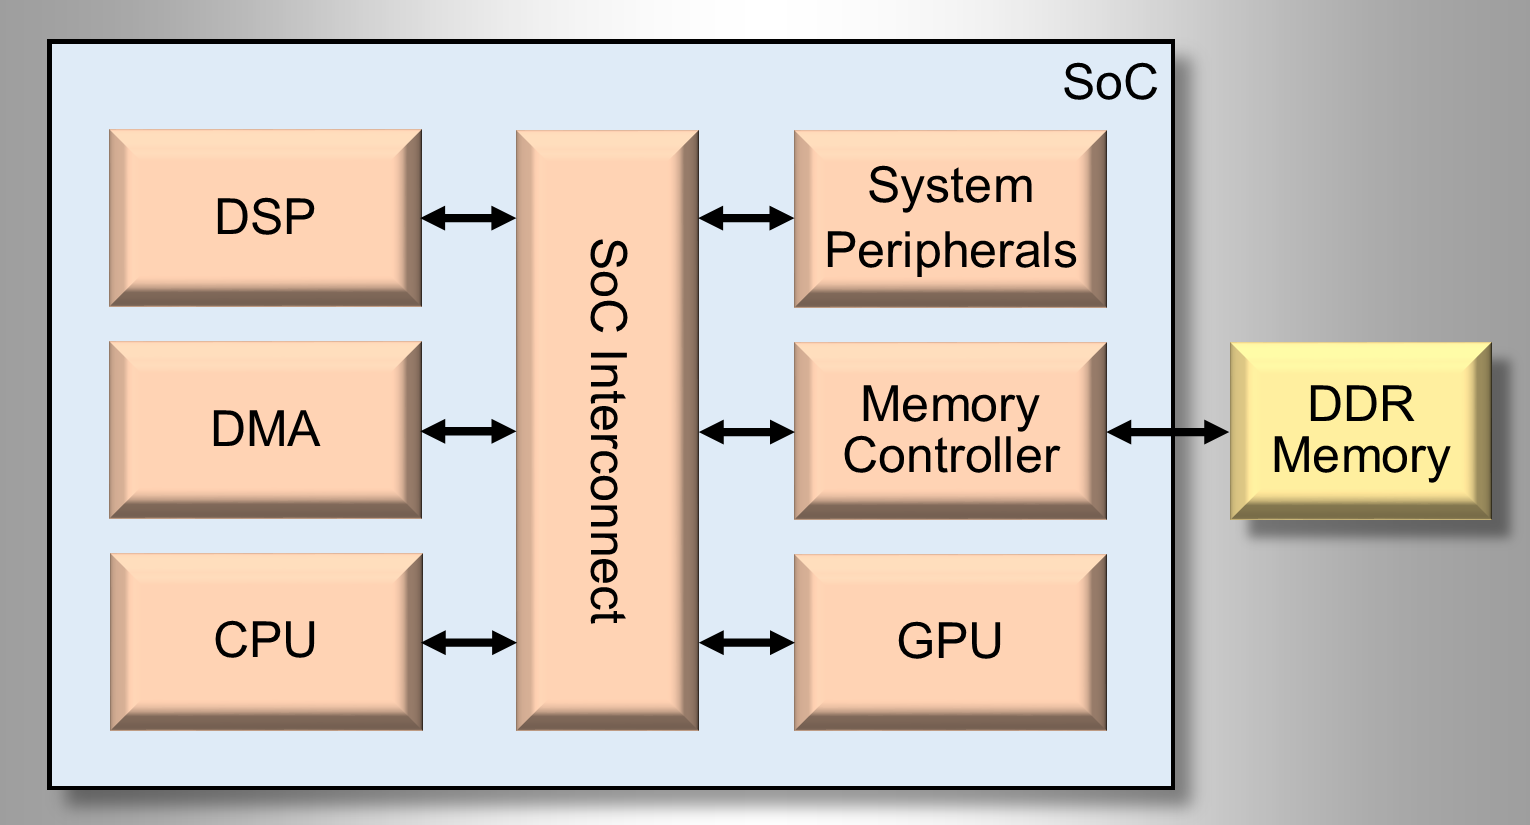 Typical SoC Architecture